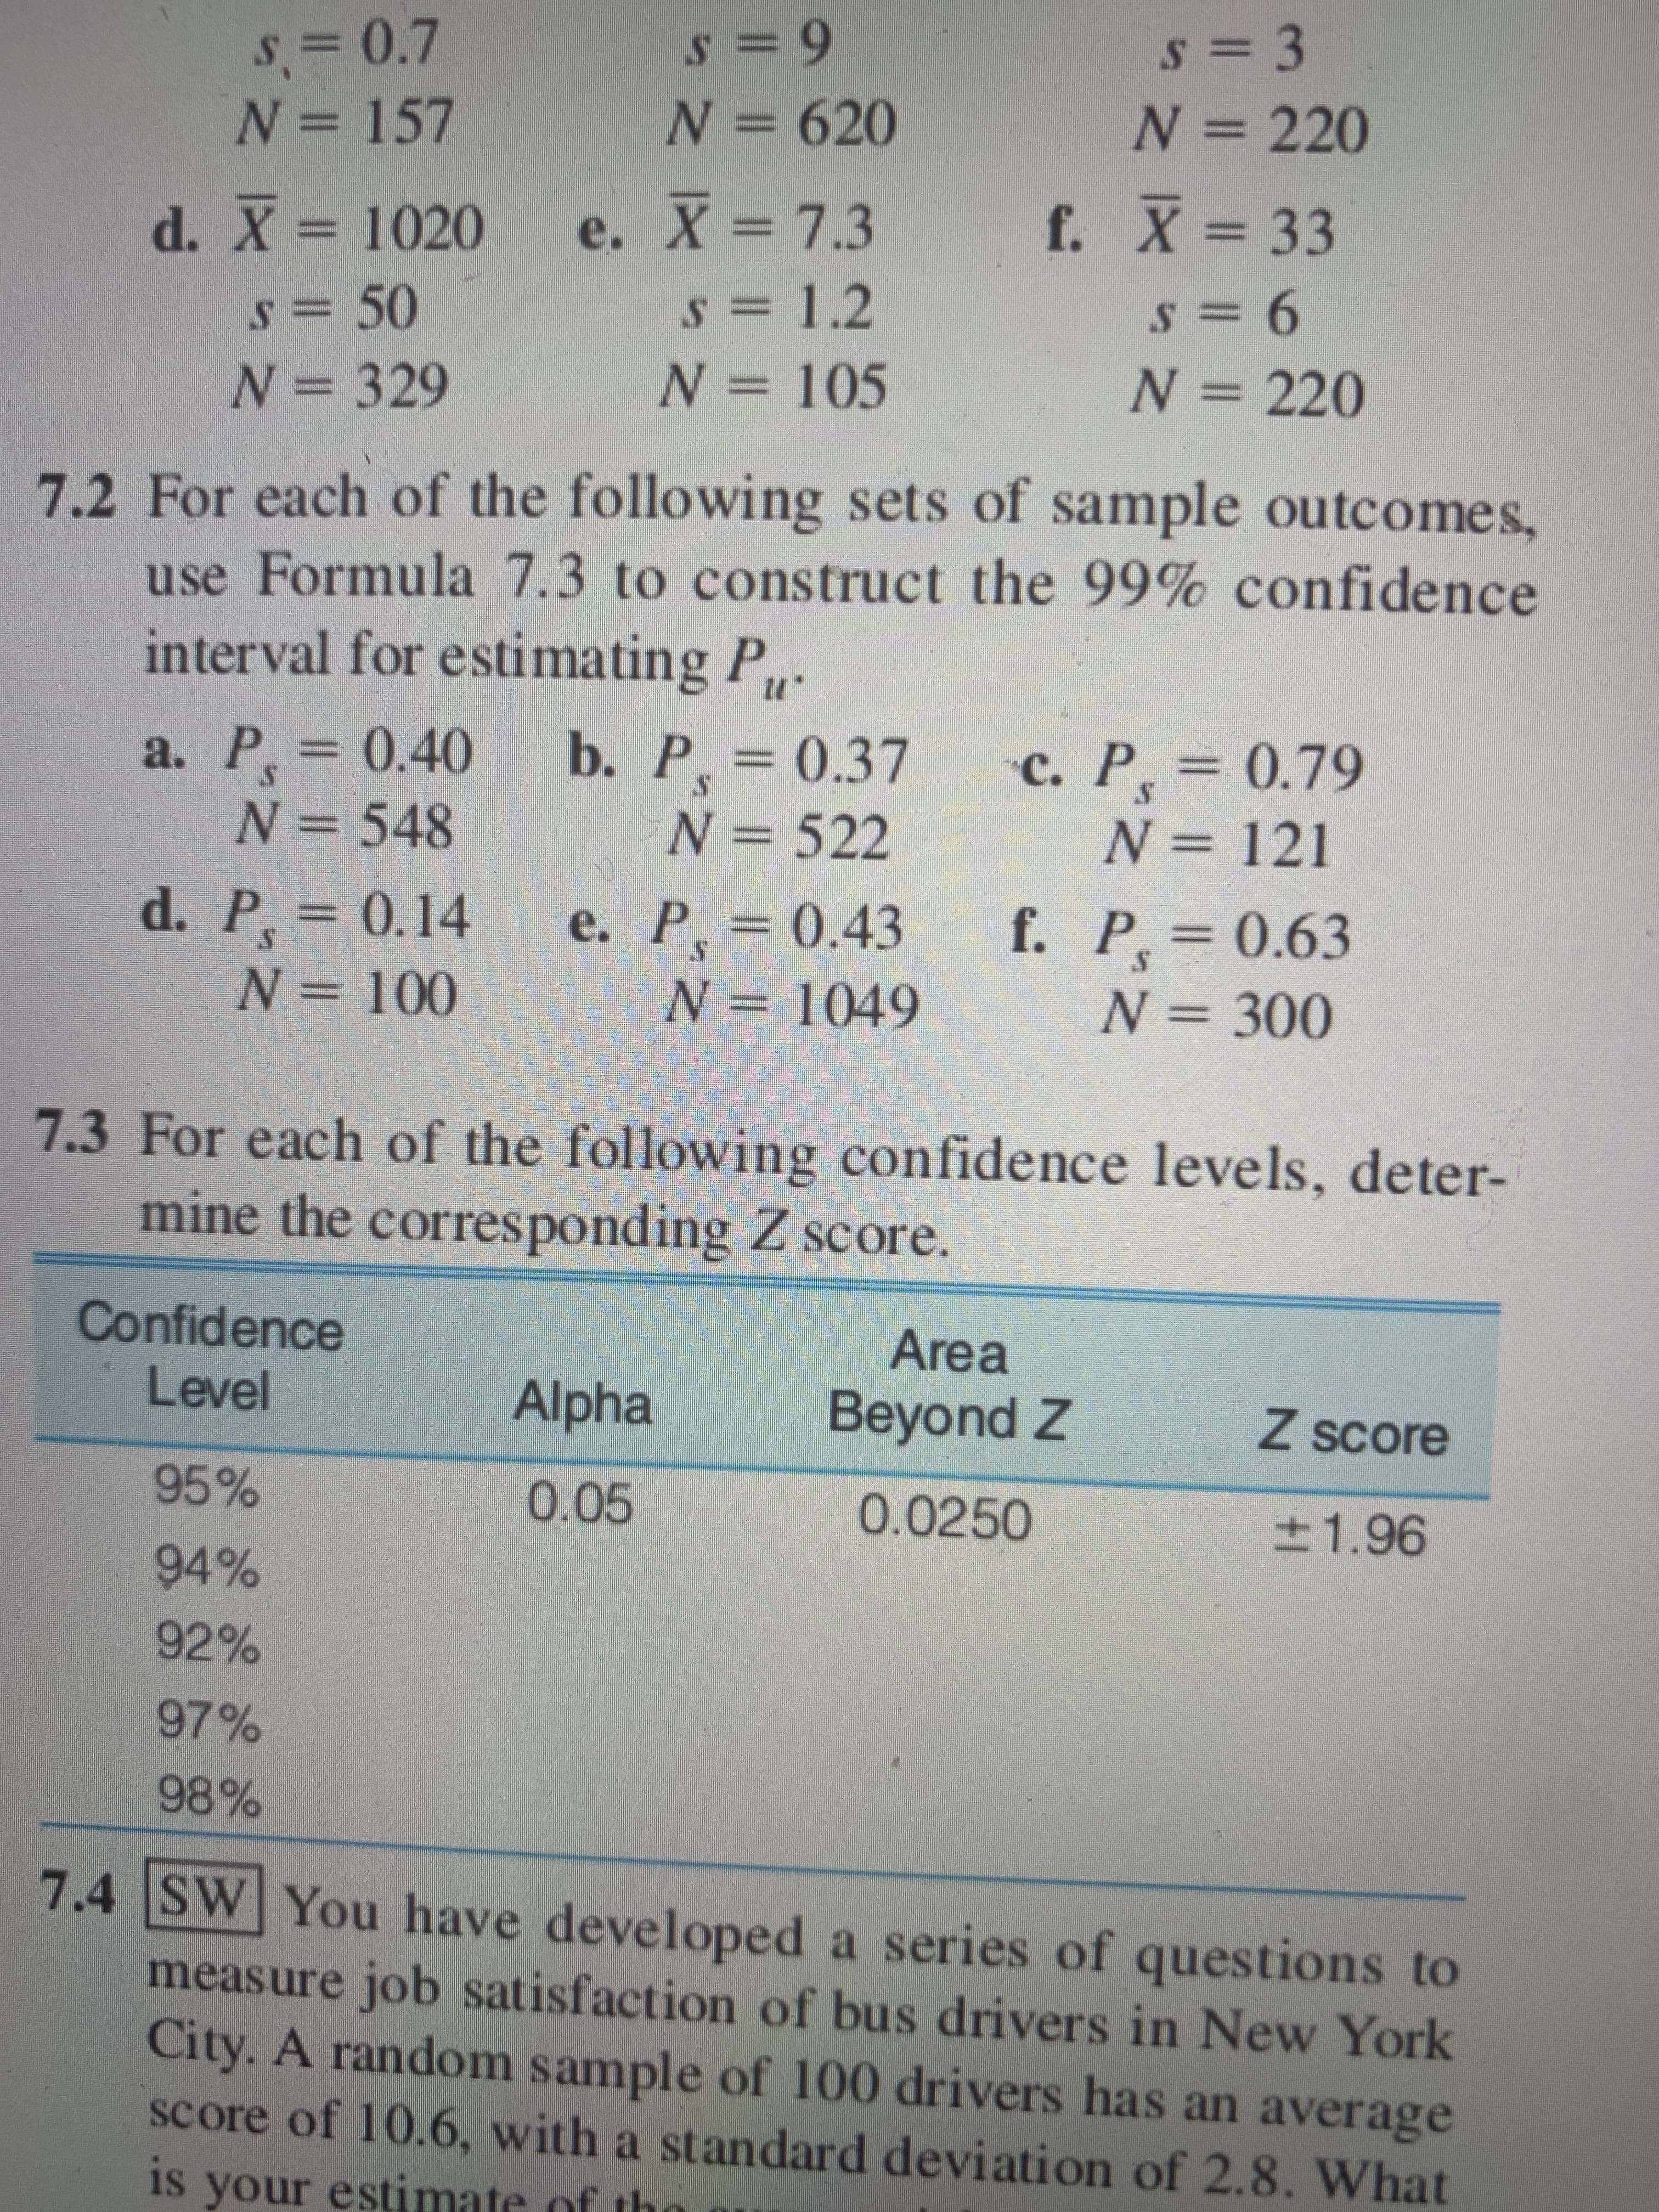 For each of the following sets of sample outcomes,
use Formula 7.3 to construct the 99% confidence
interval for estimating P.
